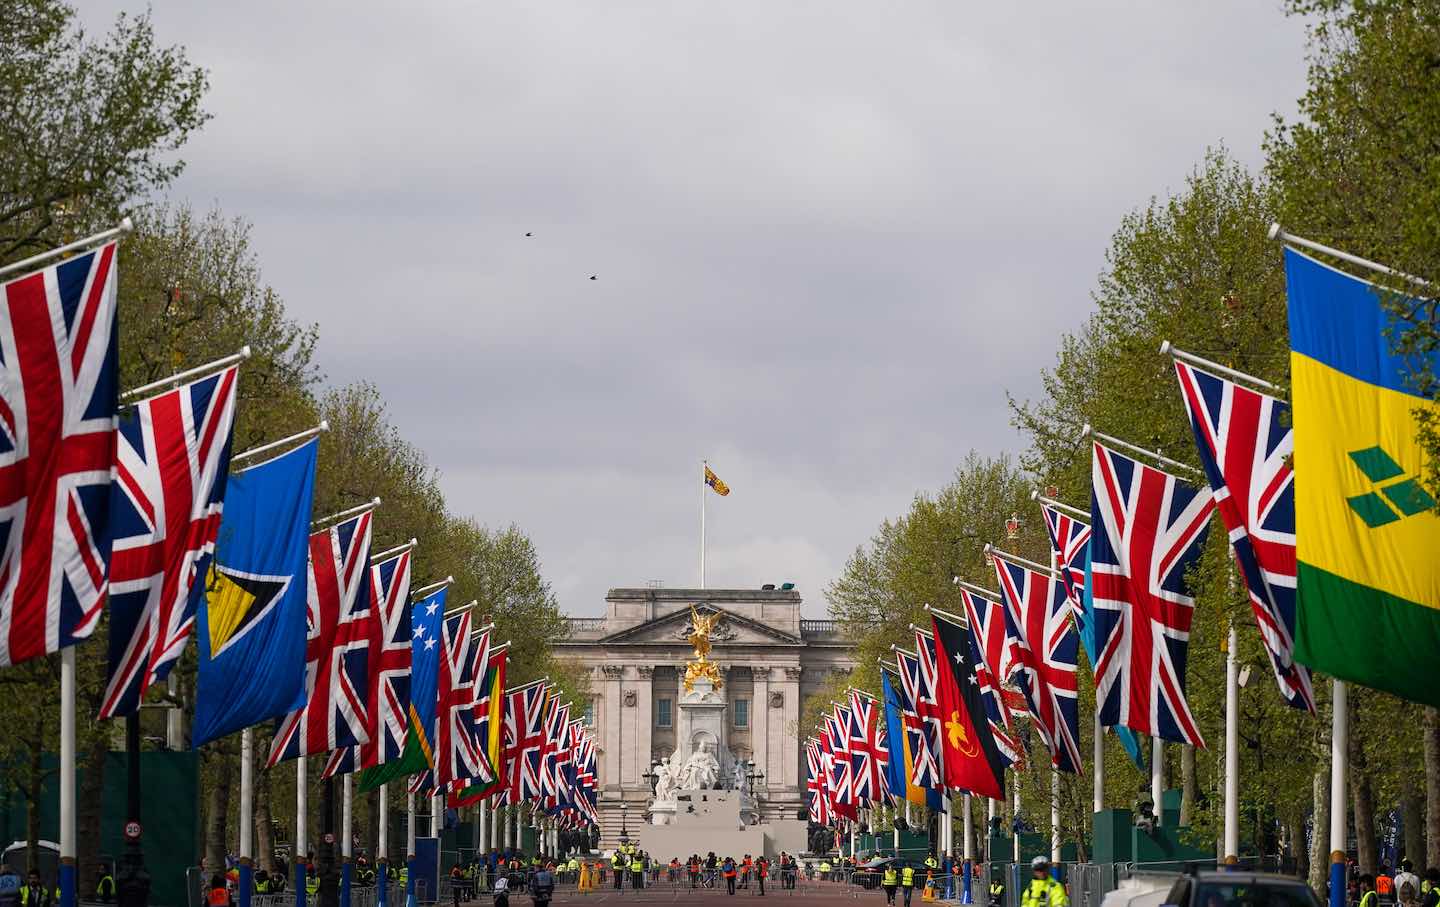 Flags hang along the length of the Mall in London, England, as preparations continue for the Coronation of King Charles III